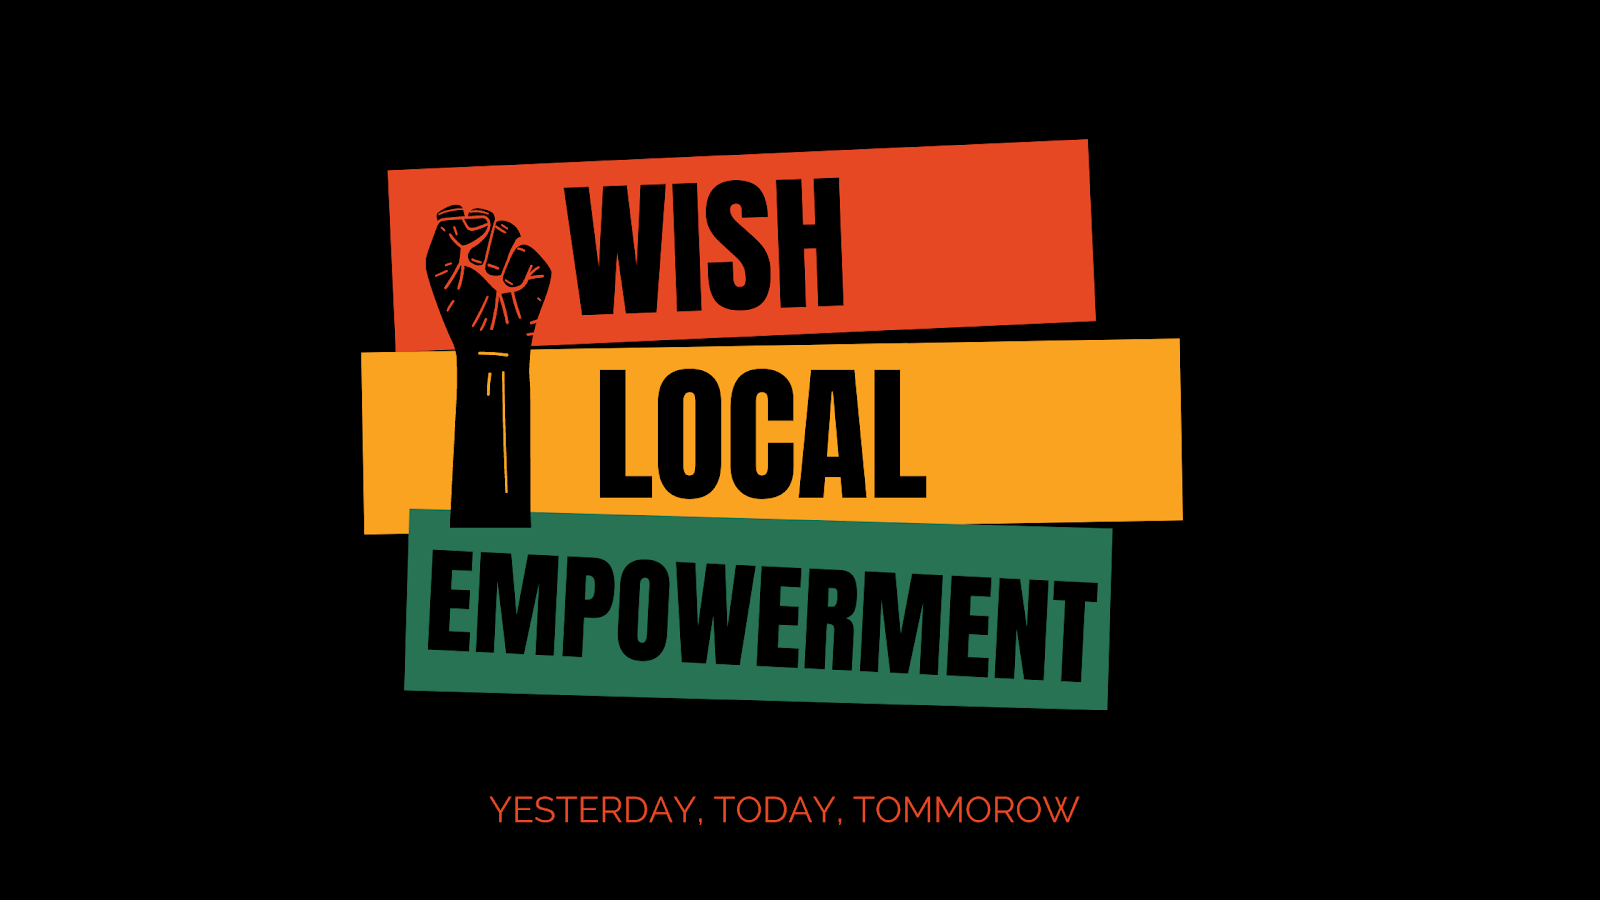 Sign Up with Wish Local and the Empowerment Program Today!